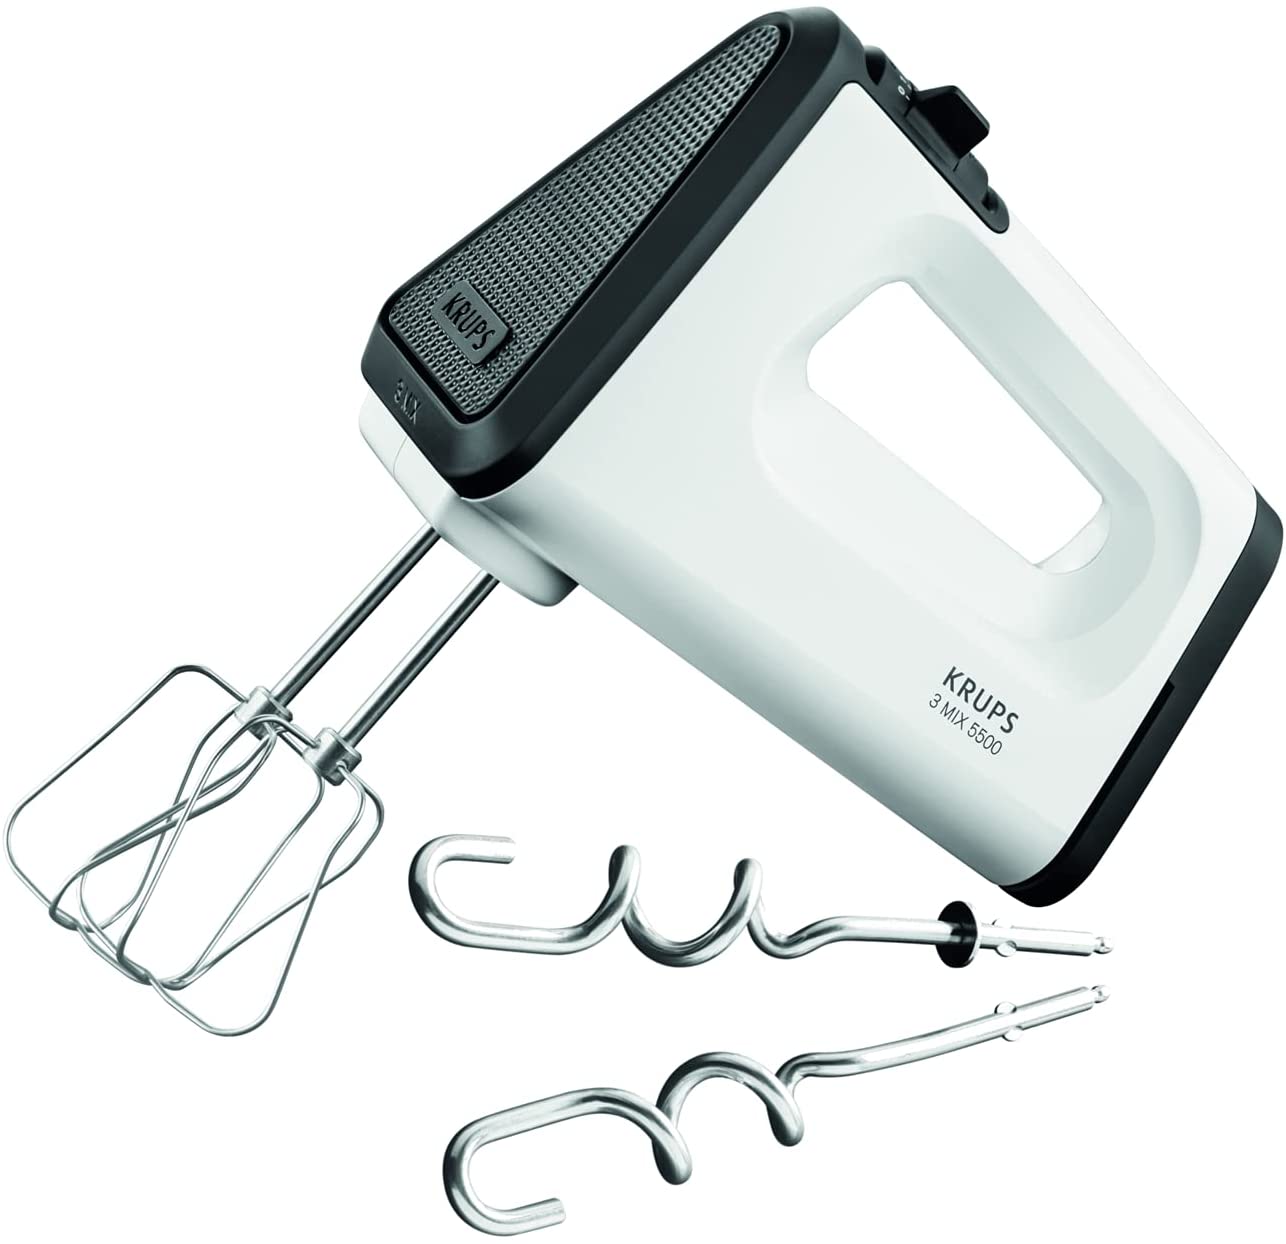 KRUPS 3 MIX 5500 Hand Mixer 60 Year Edition GN5058 (500 W, 5 Speeds + Turbo & Eject Button, Extra Long Cable, Whisk & Dough Hook Made of Stainless Steel) Black/Copper